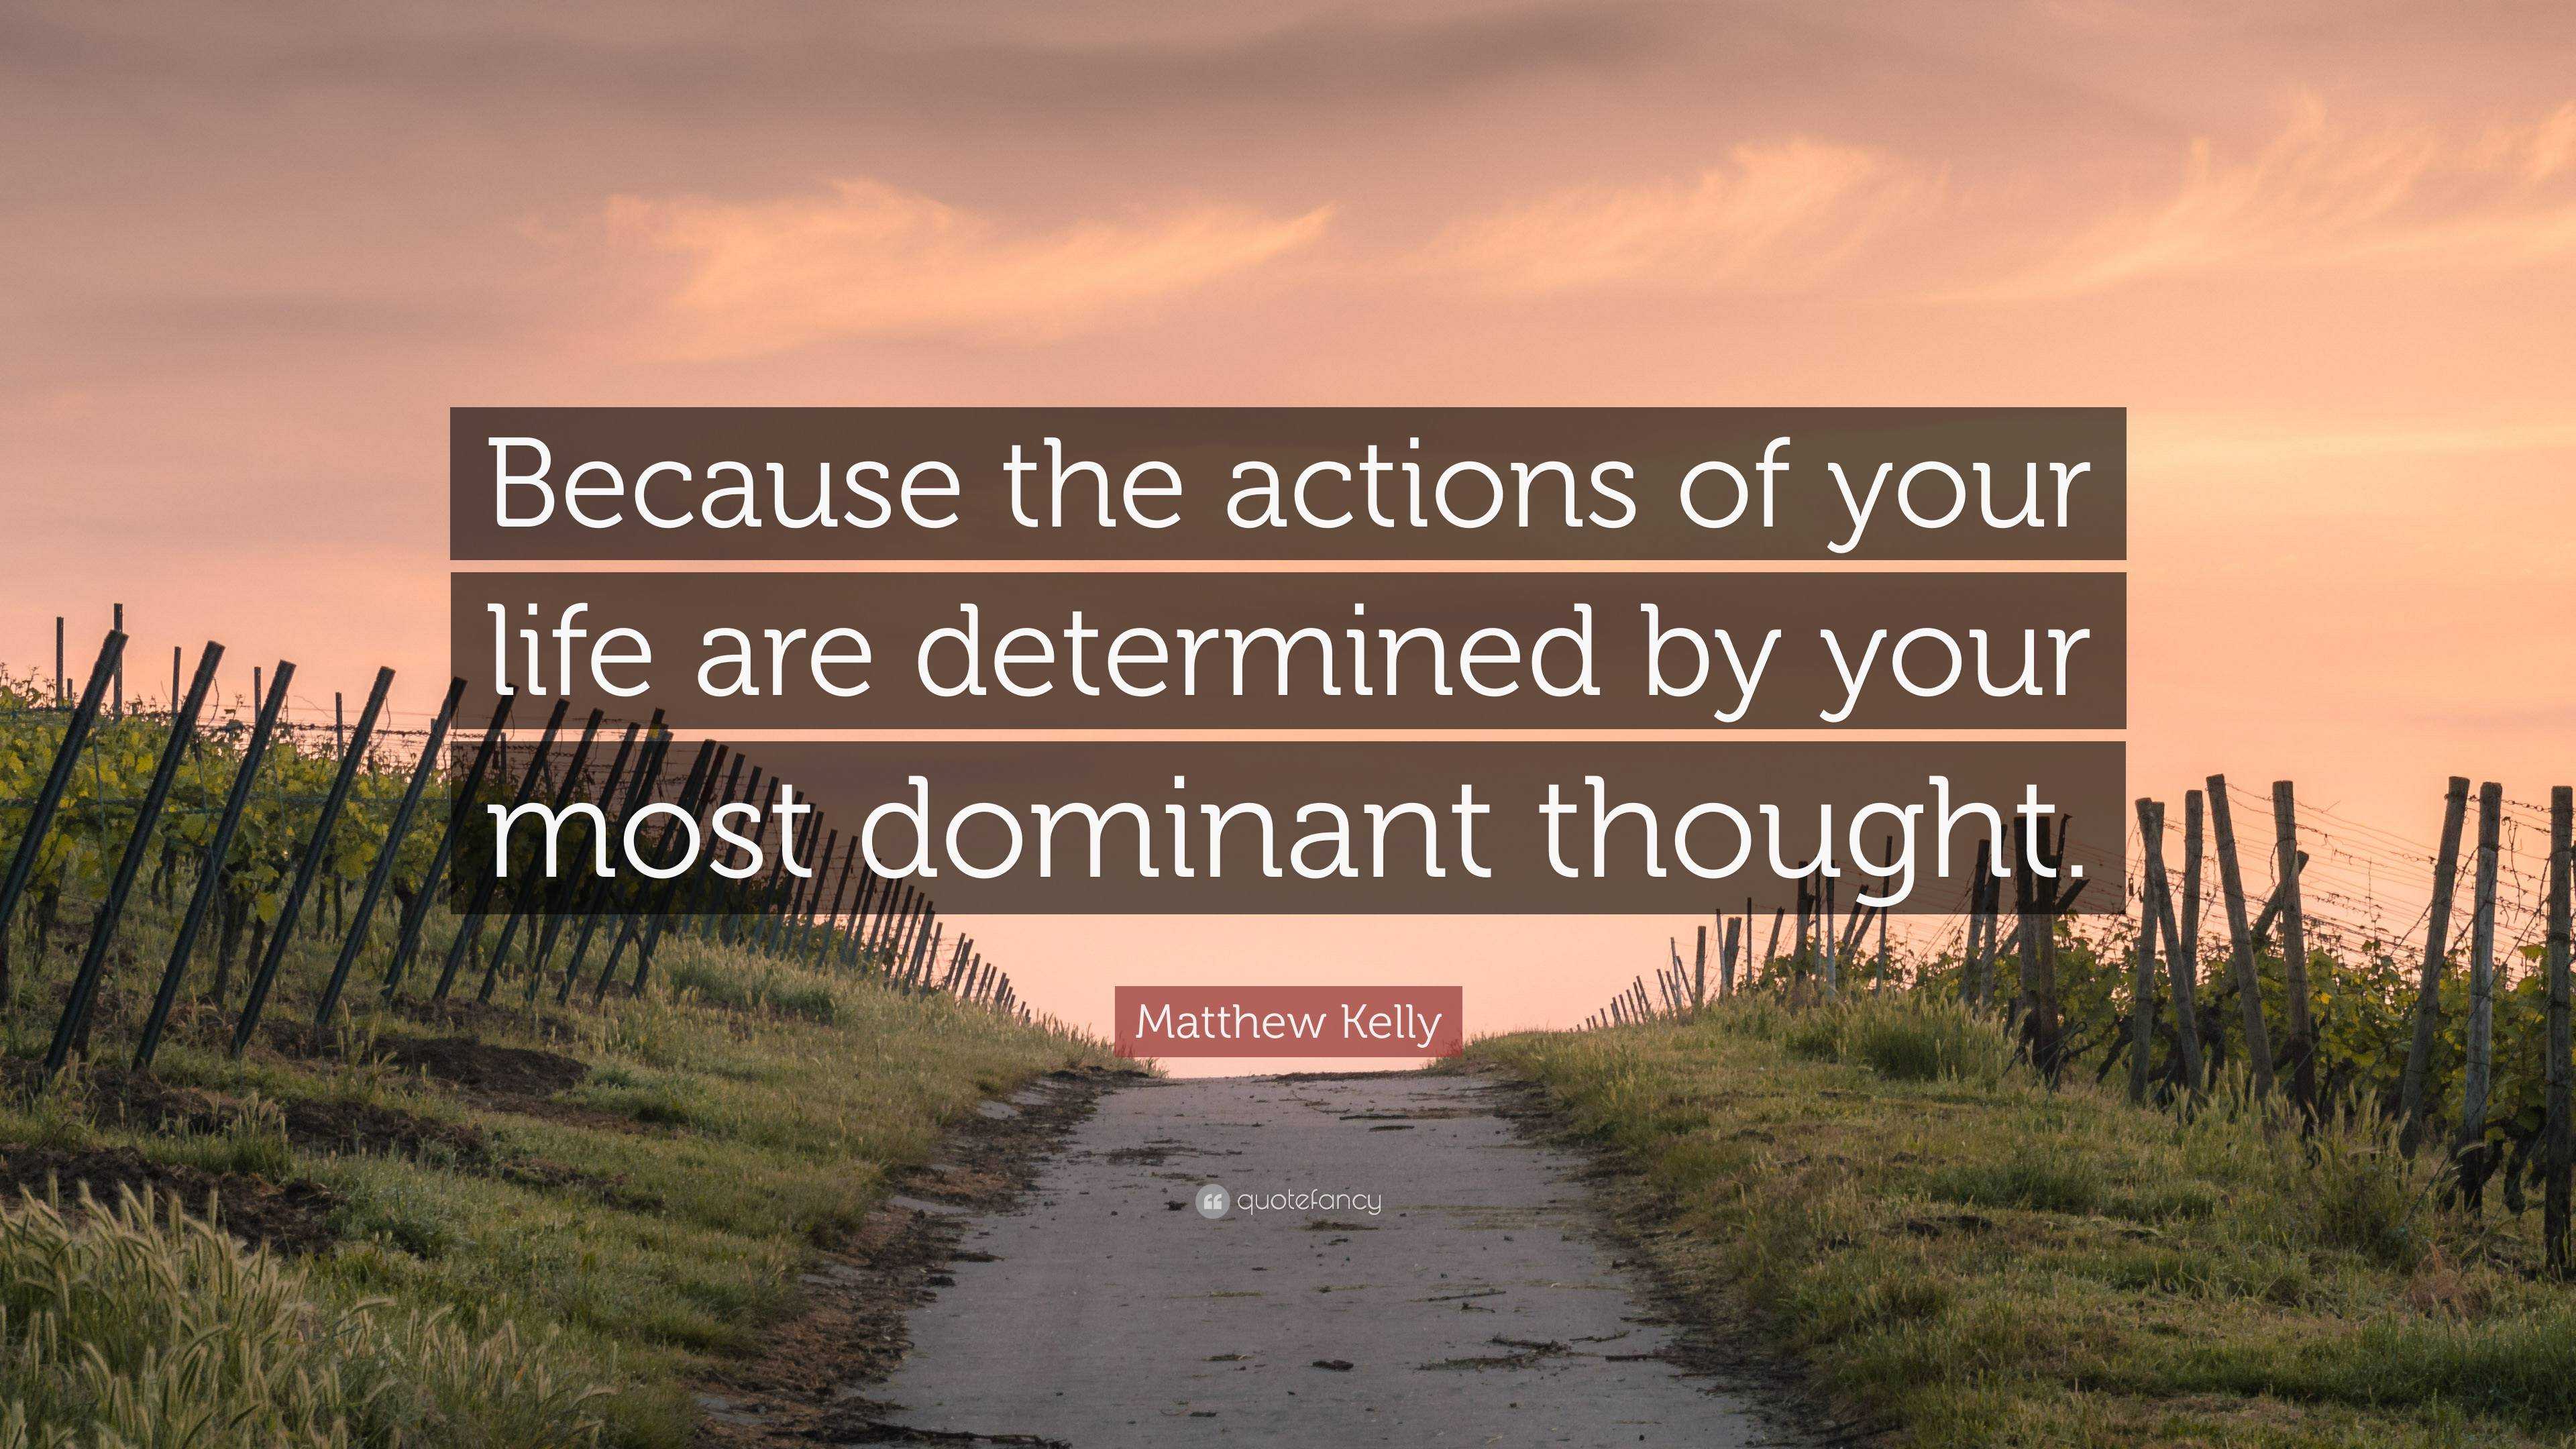 Matthew Kelly Quote: “Because the actions of your life are determined ...